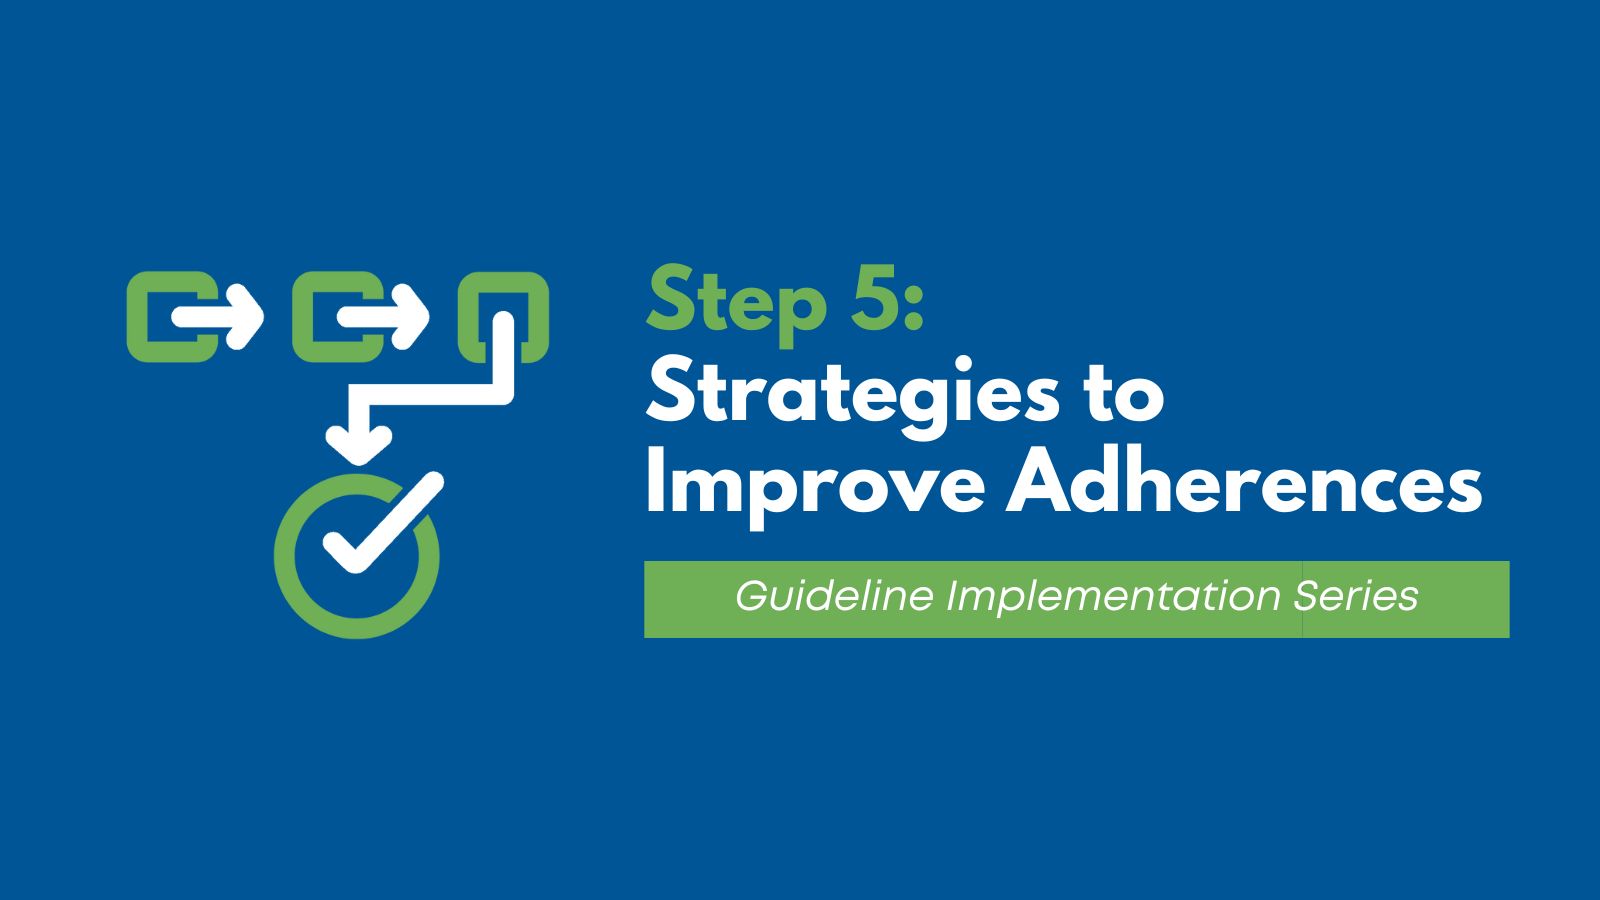 Clinical Guidelines Implementation Strategy - Improving Adherence